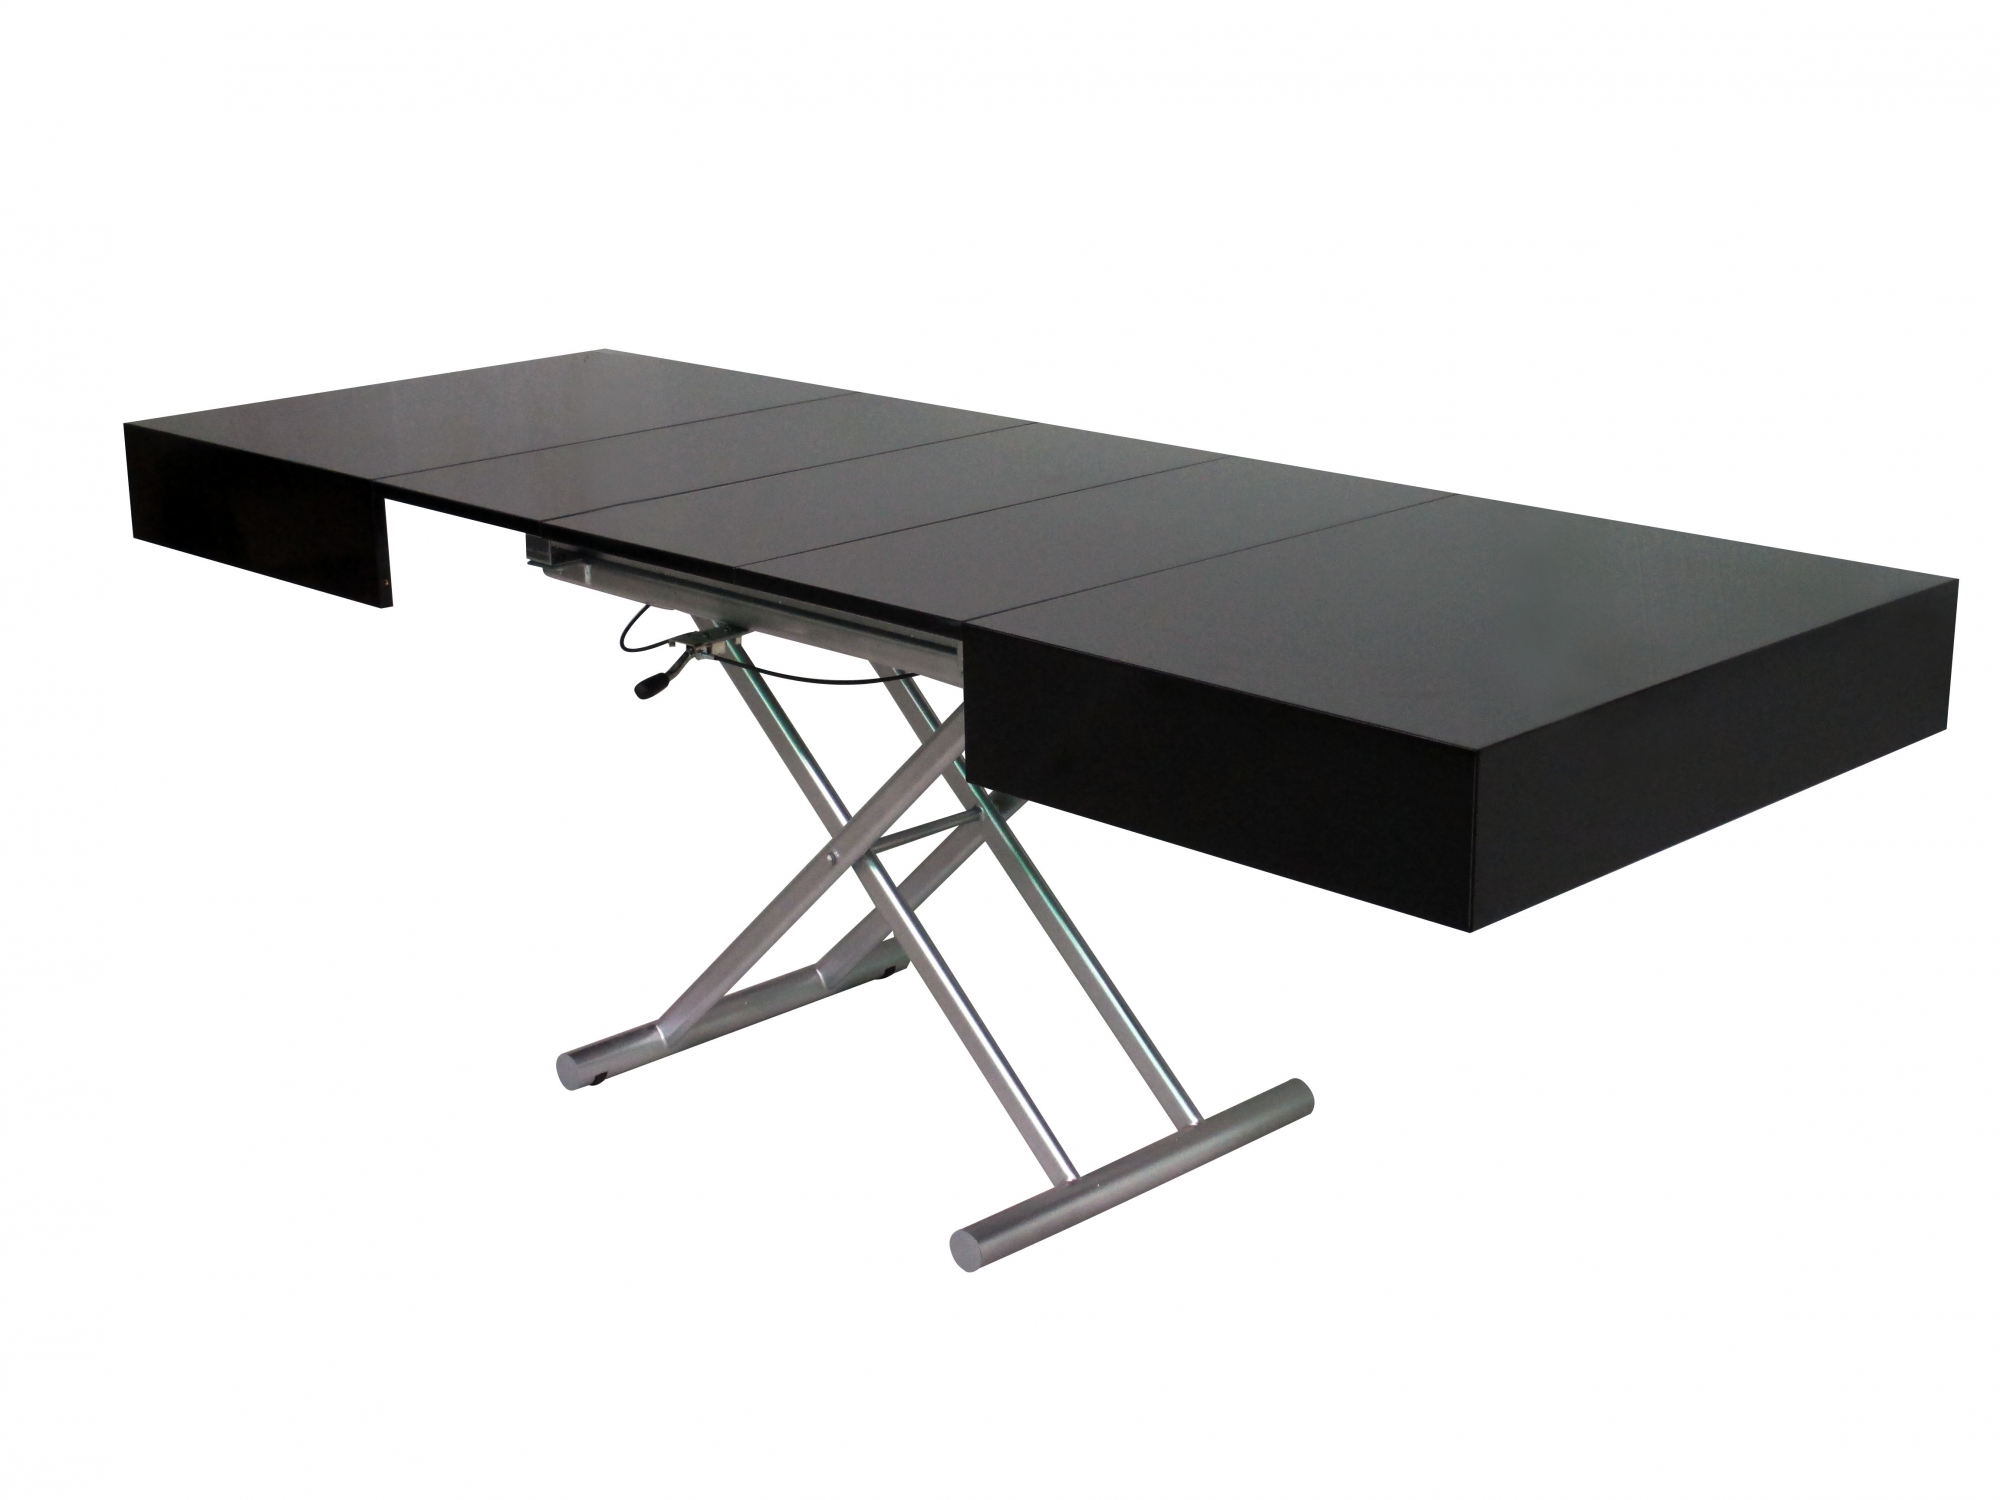 Table basse relevable promo